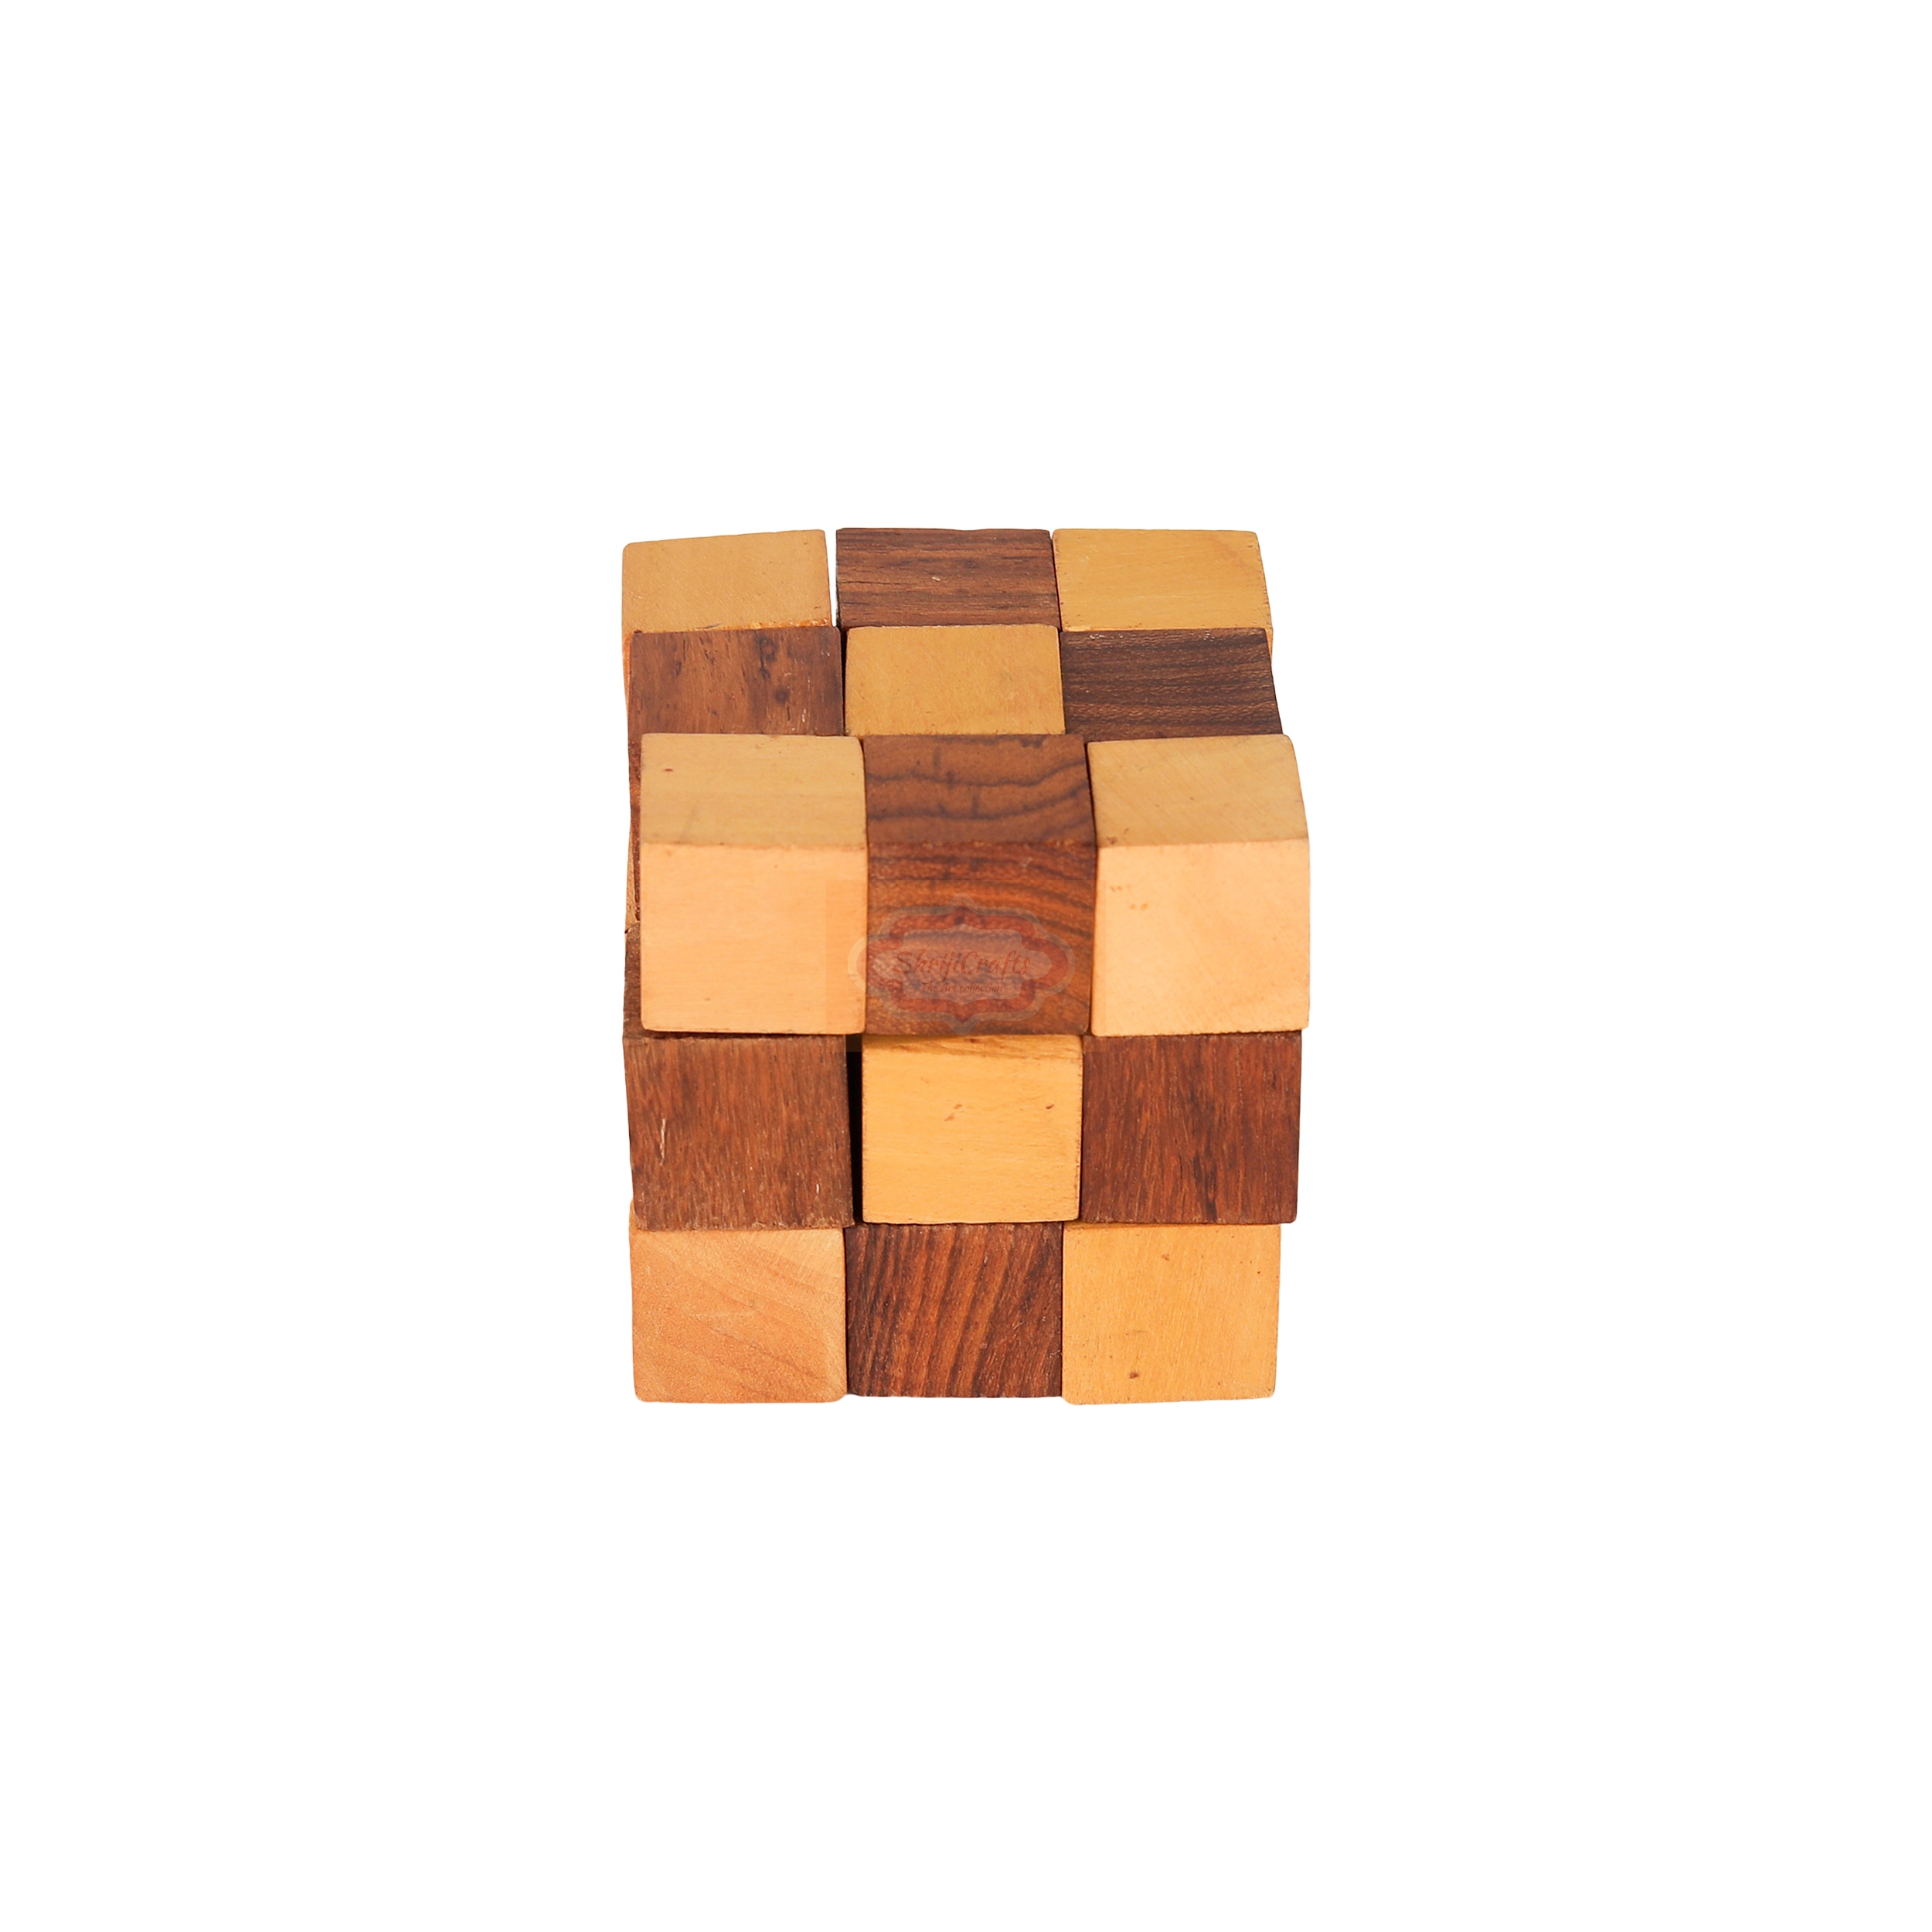 Shrijicrafts | ShrijiCrafts® Wooden IQ Teaser Puzzle Adult Snake Cube Handmade India Unique Gifts for Kids and Adult (2.5x2.5x2.5-inch) 0